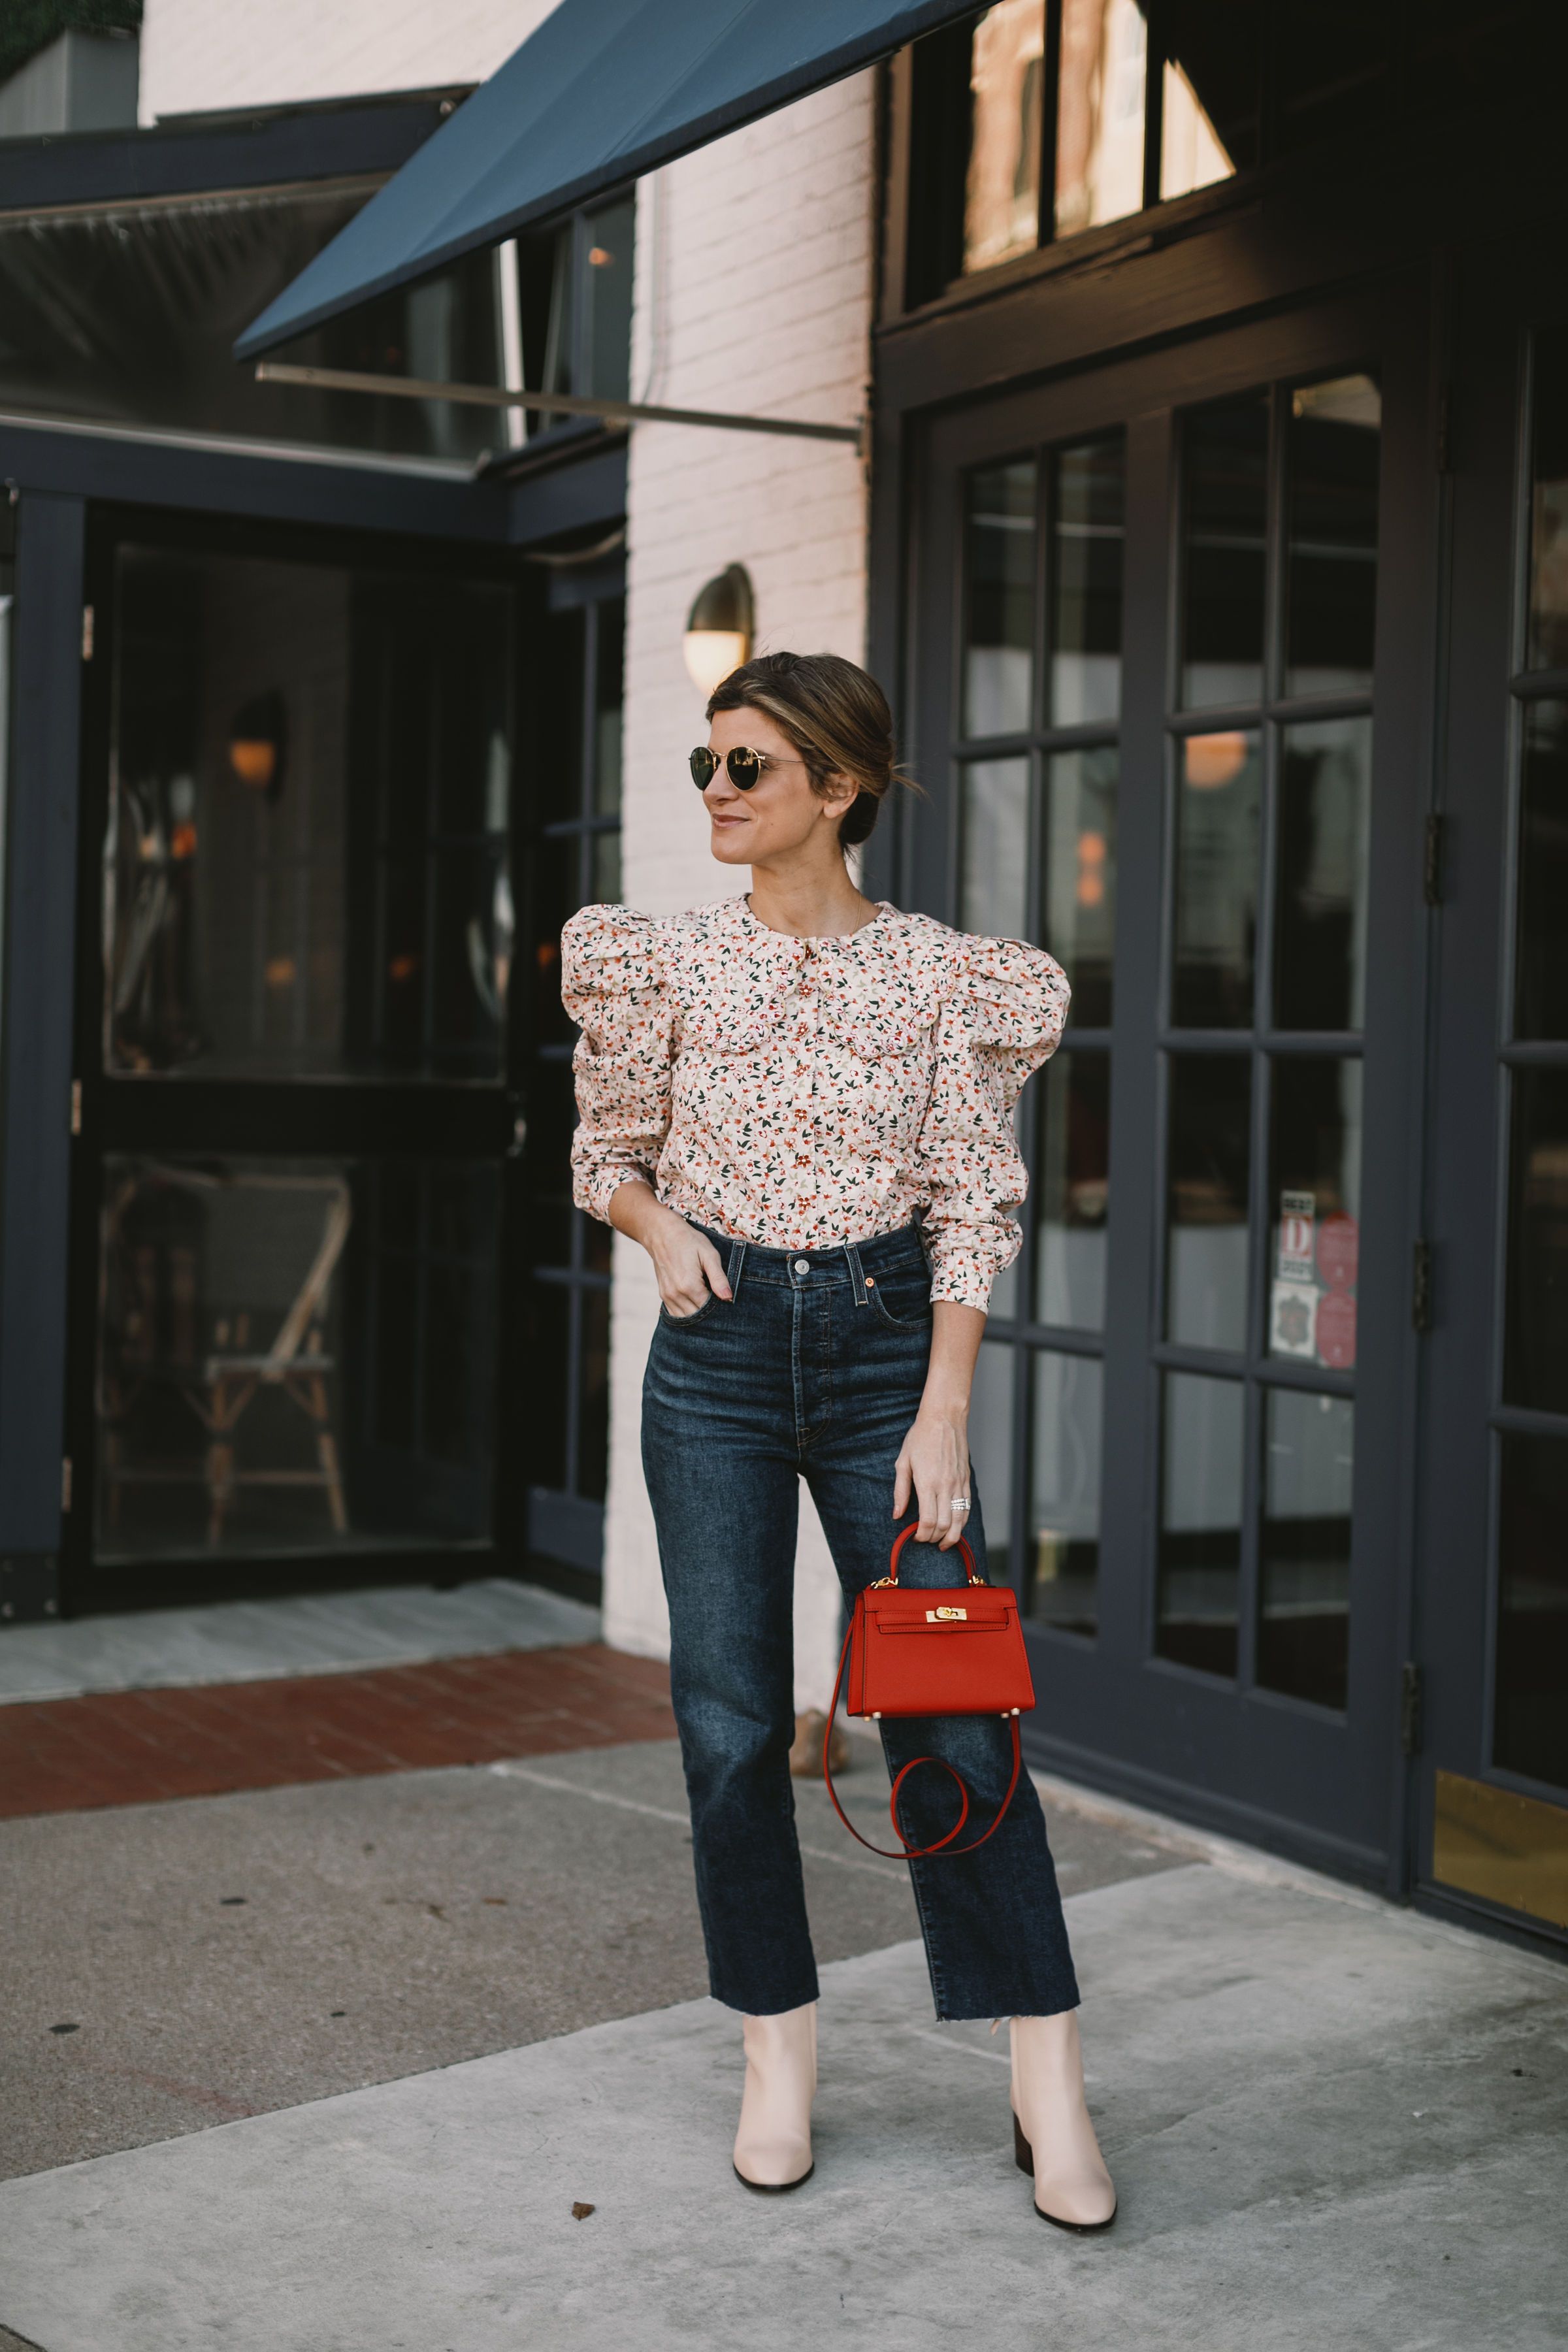 brighton butler jeans and booties outfit with feminine floral top